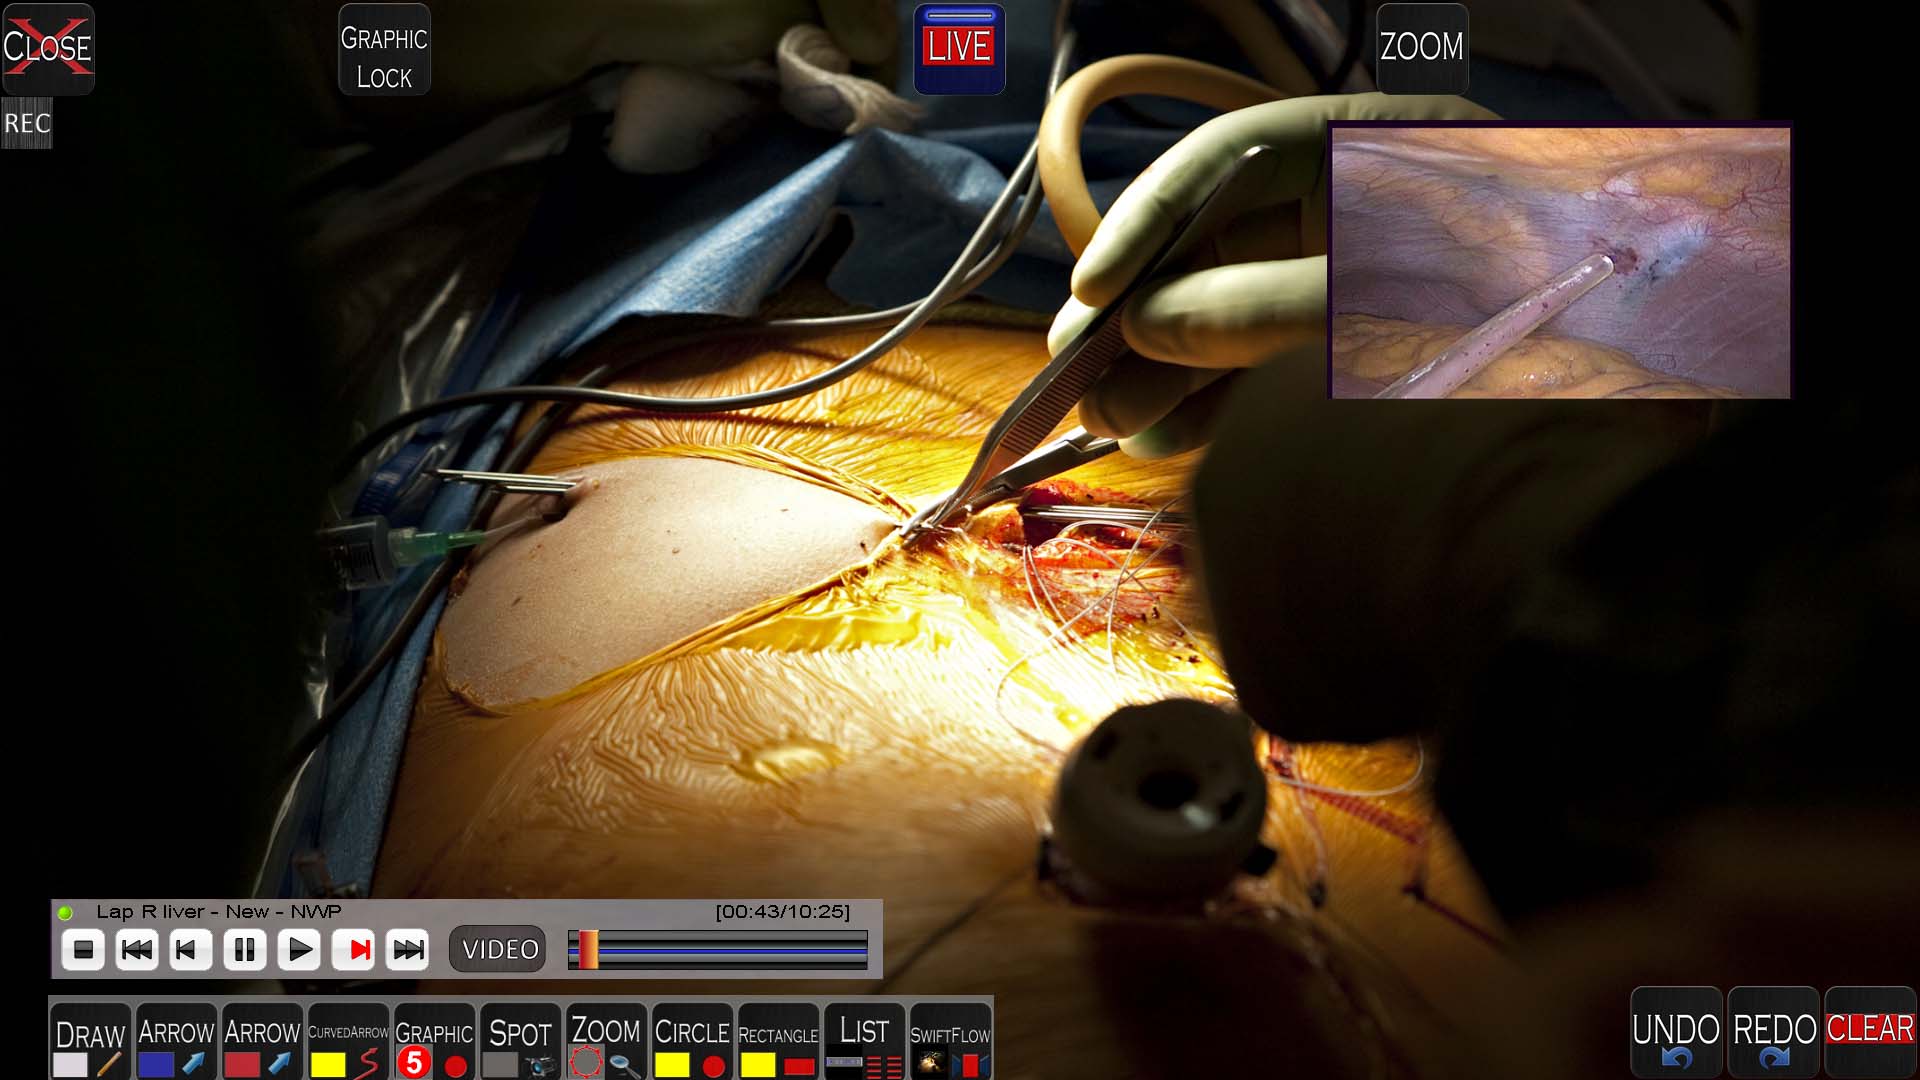 MVC Medical Telestrator with POINT-HD software showing surgery video and picture in picture of live feedback from remote surgeon